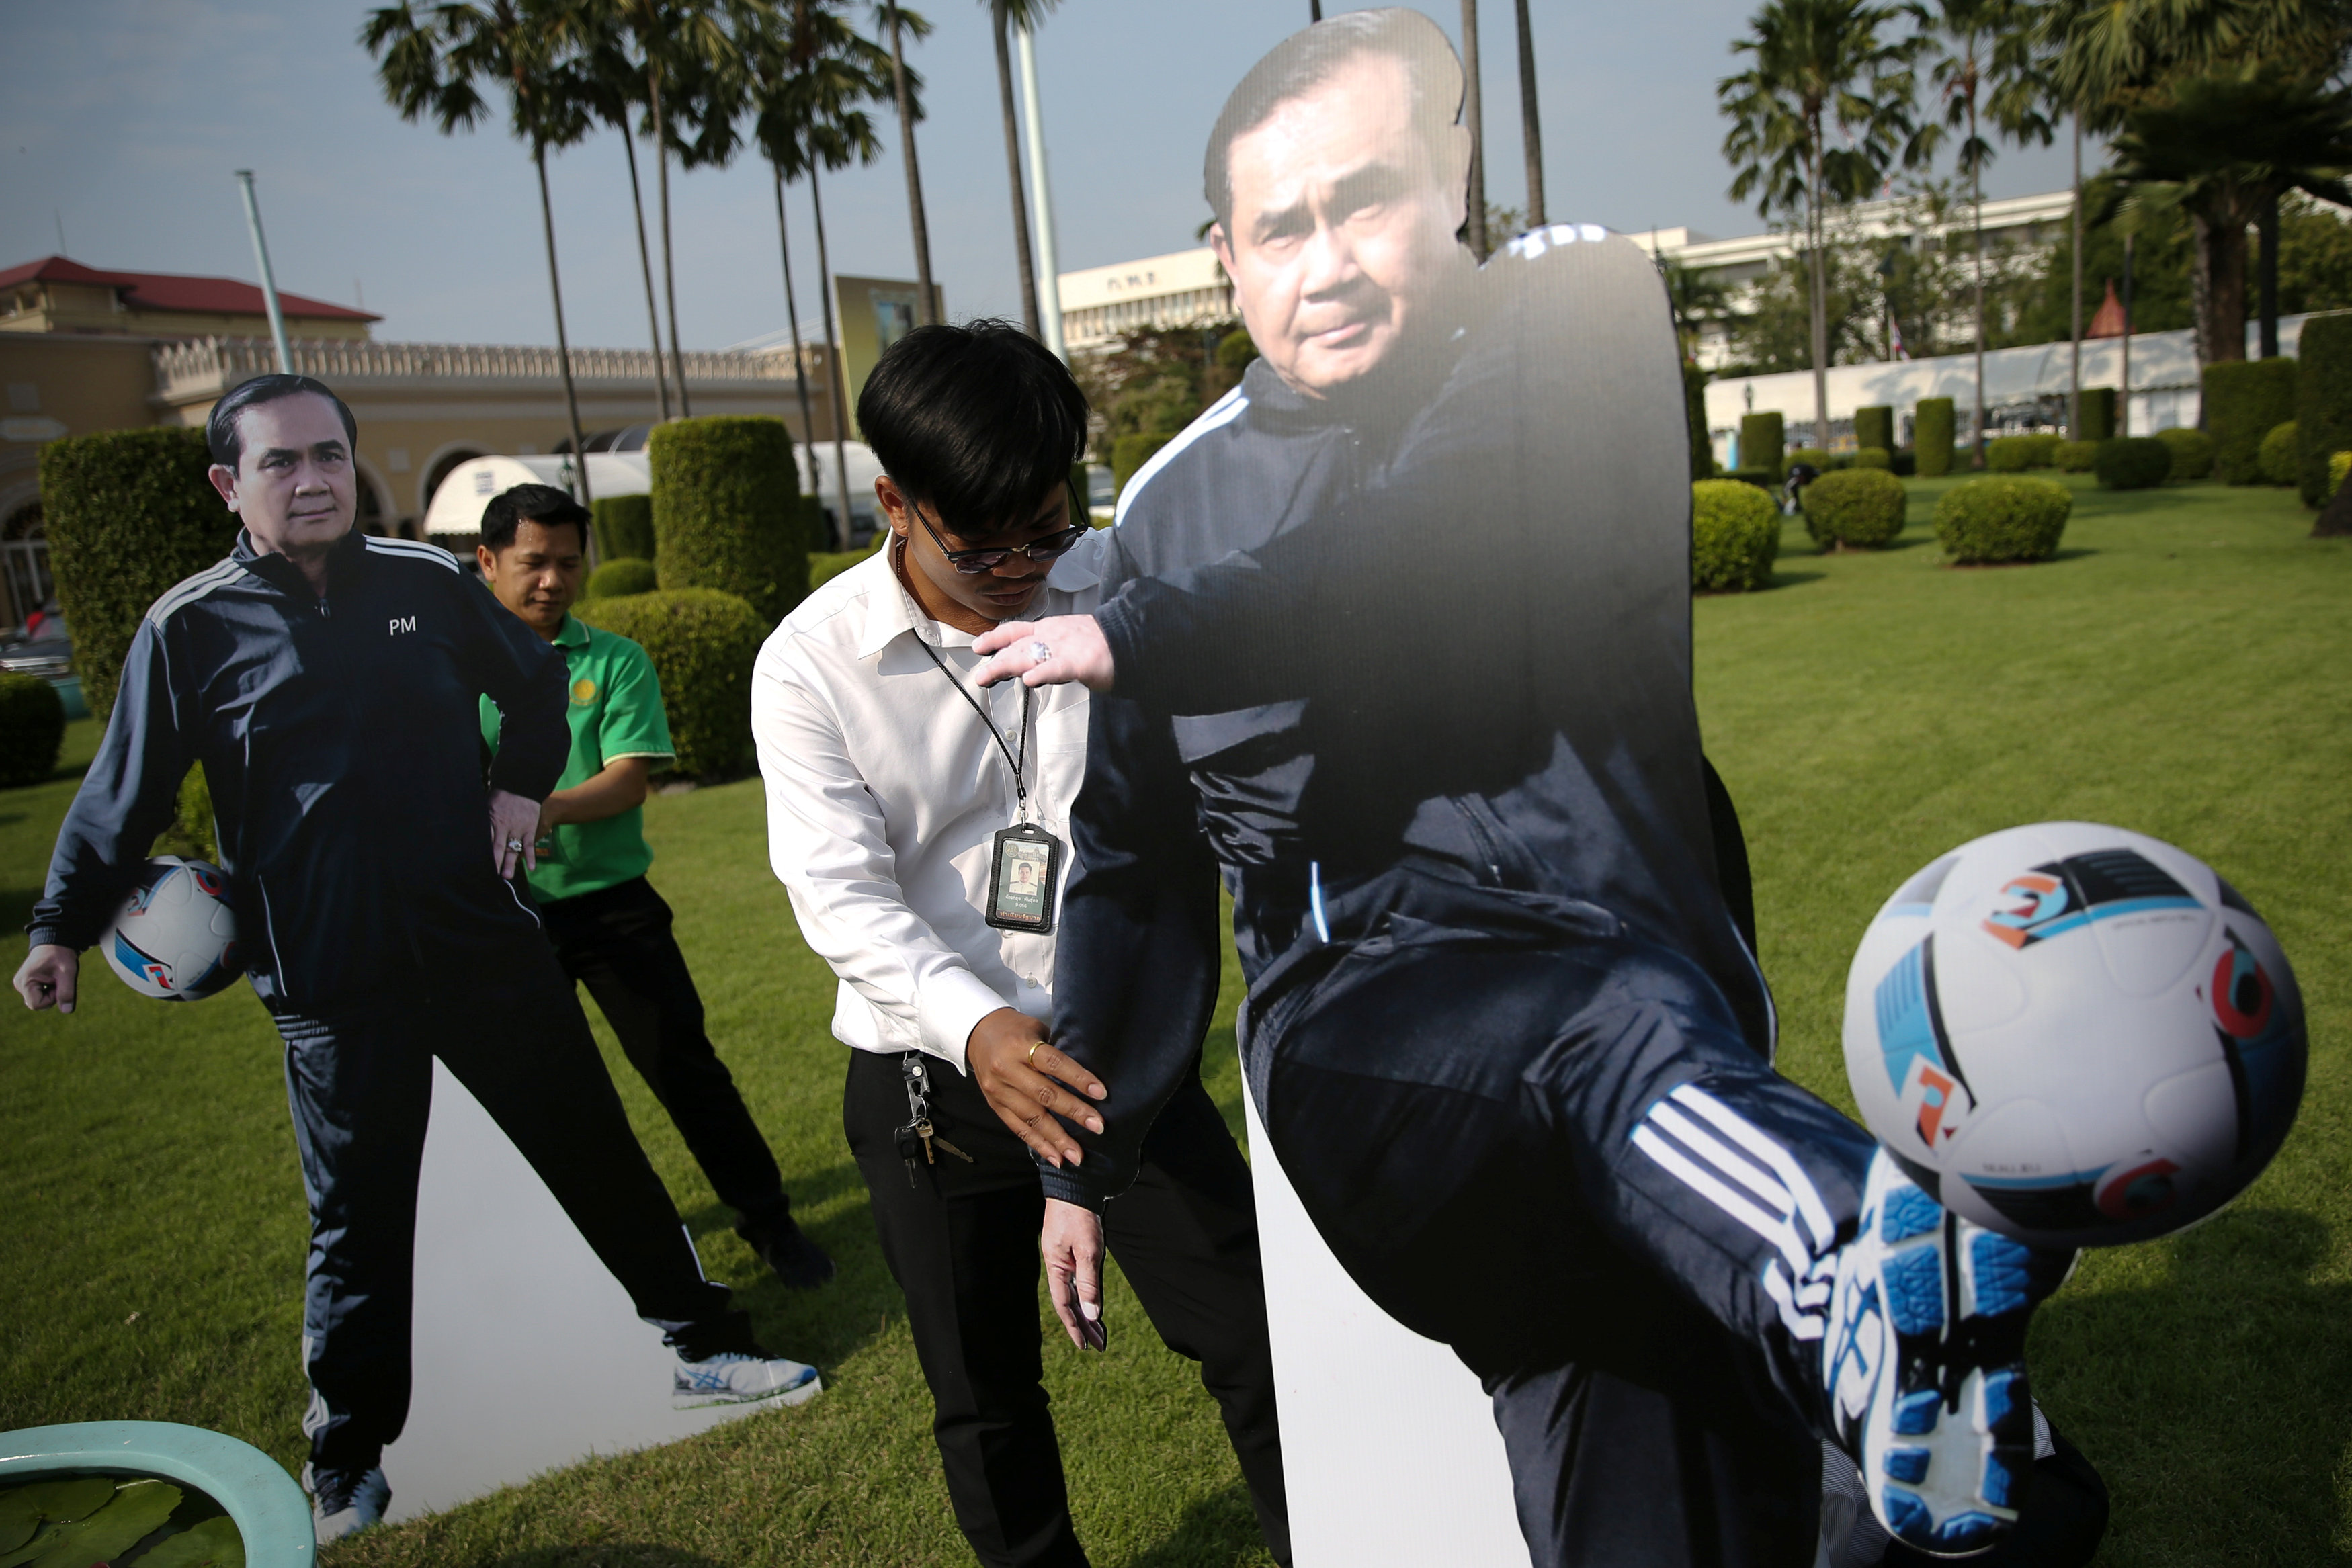 In pictures: Life-sized cutouts of Thailand's prime minister